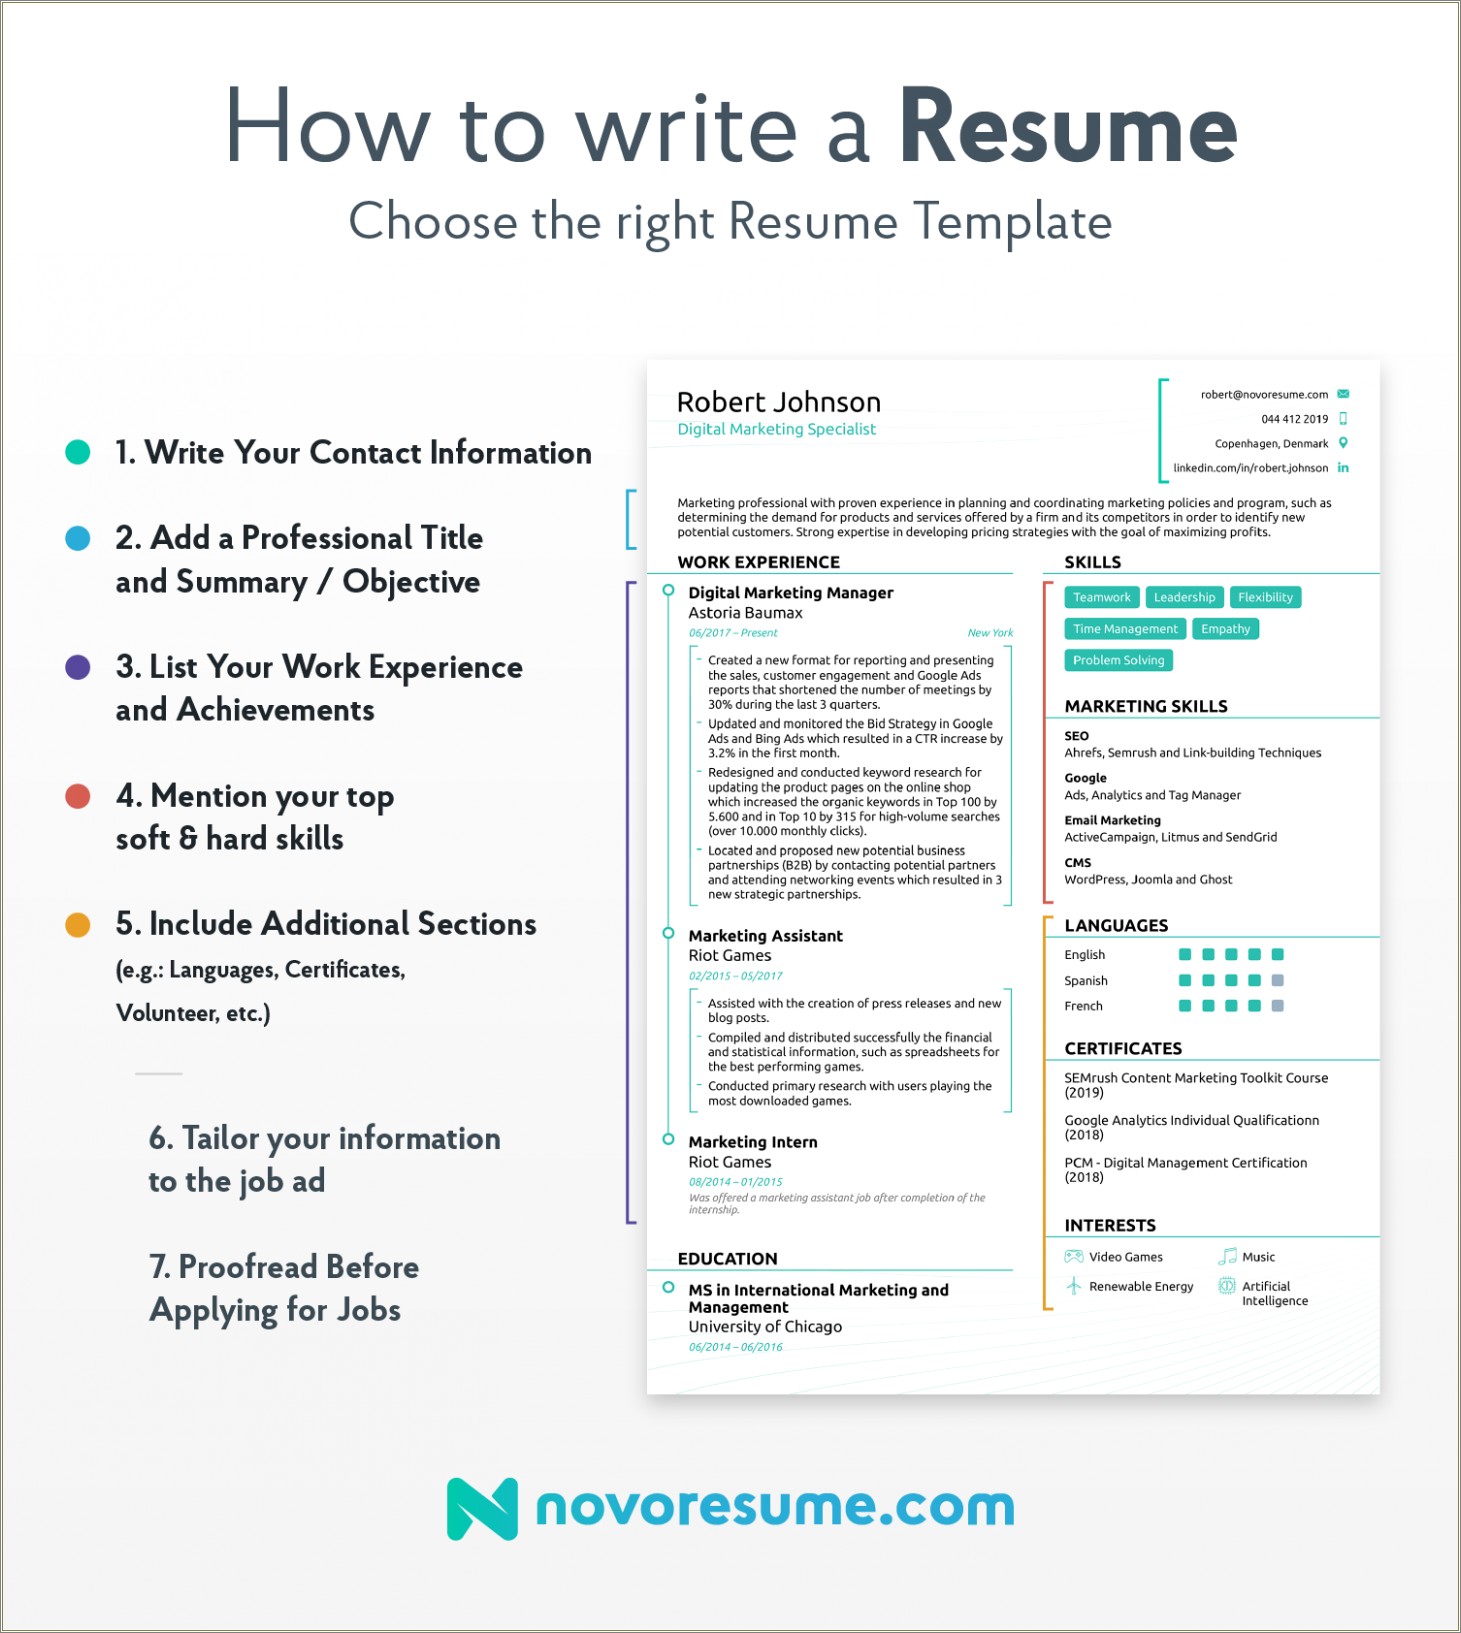 Best Information To Include On A Resume